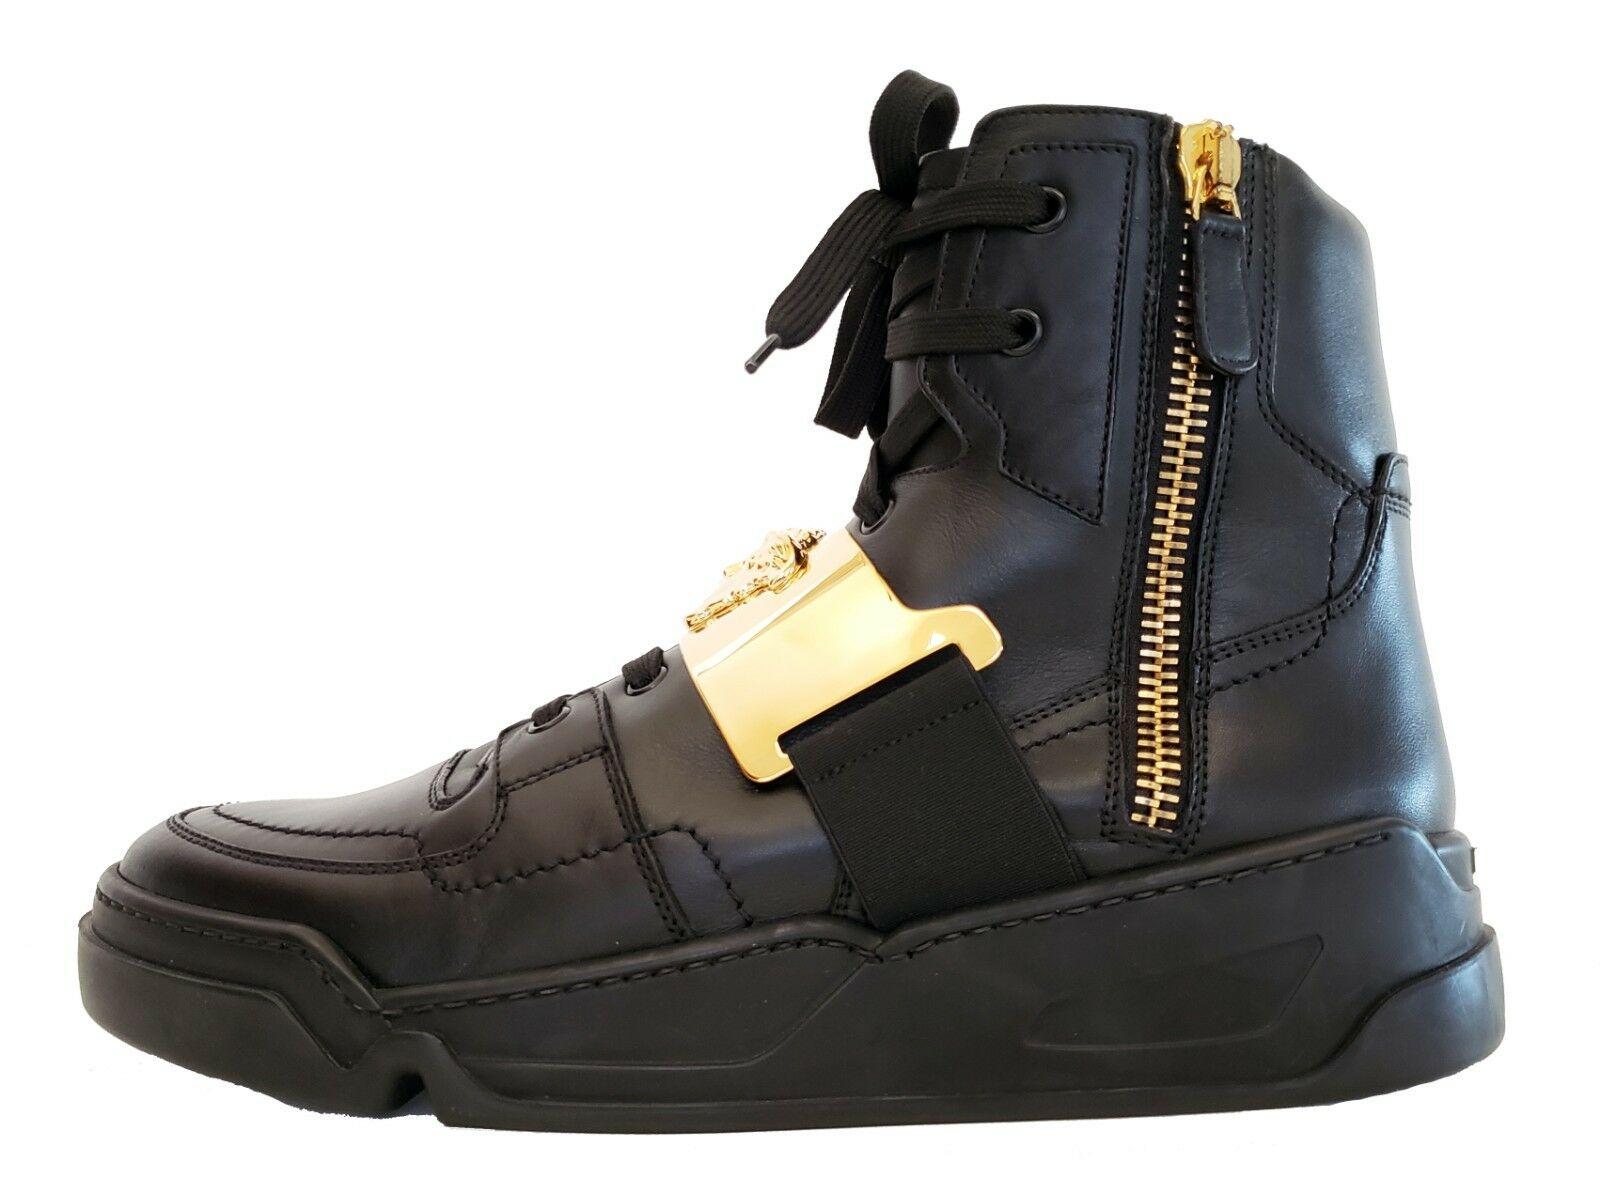 BRAND NEW 

VERSACE 

Black leather high-top sneakers.

This shoe is embodied in true Versace-style and
features smooth leather and gold tone details including
Versace’s signature Medusa head. It wouldn’t  be Versace without it.

Made in